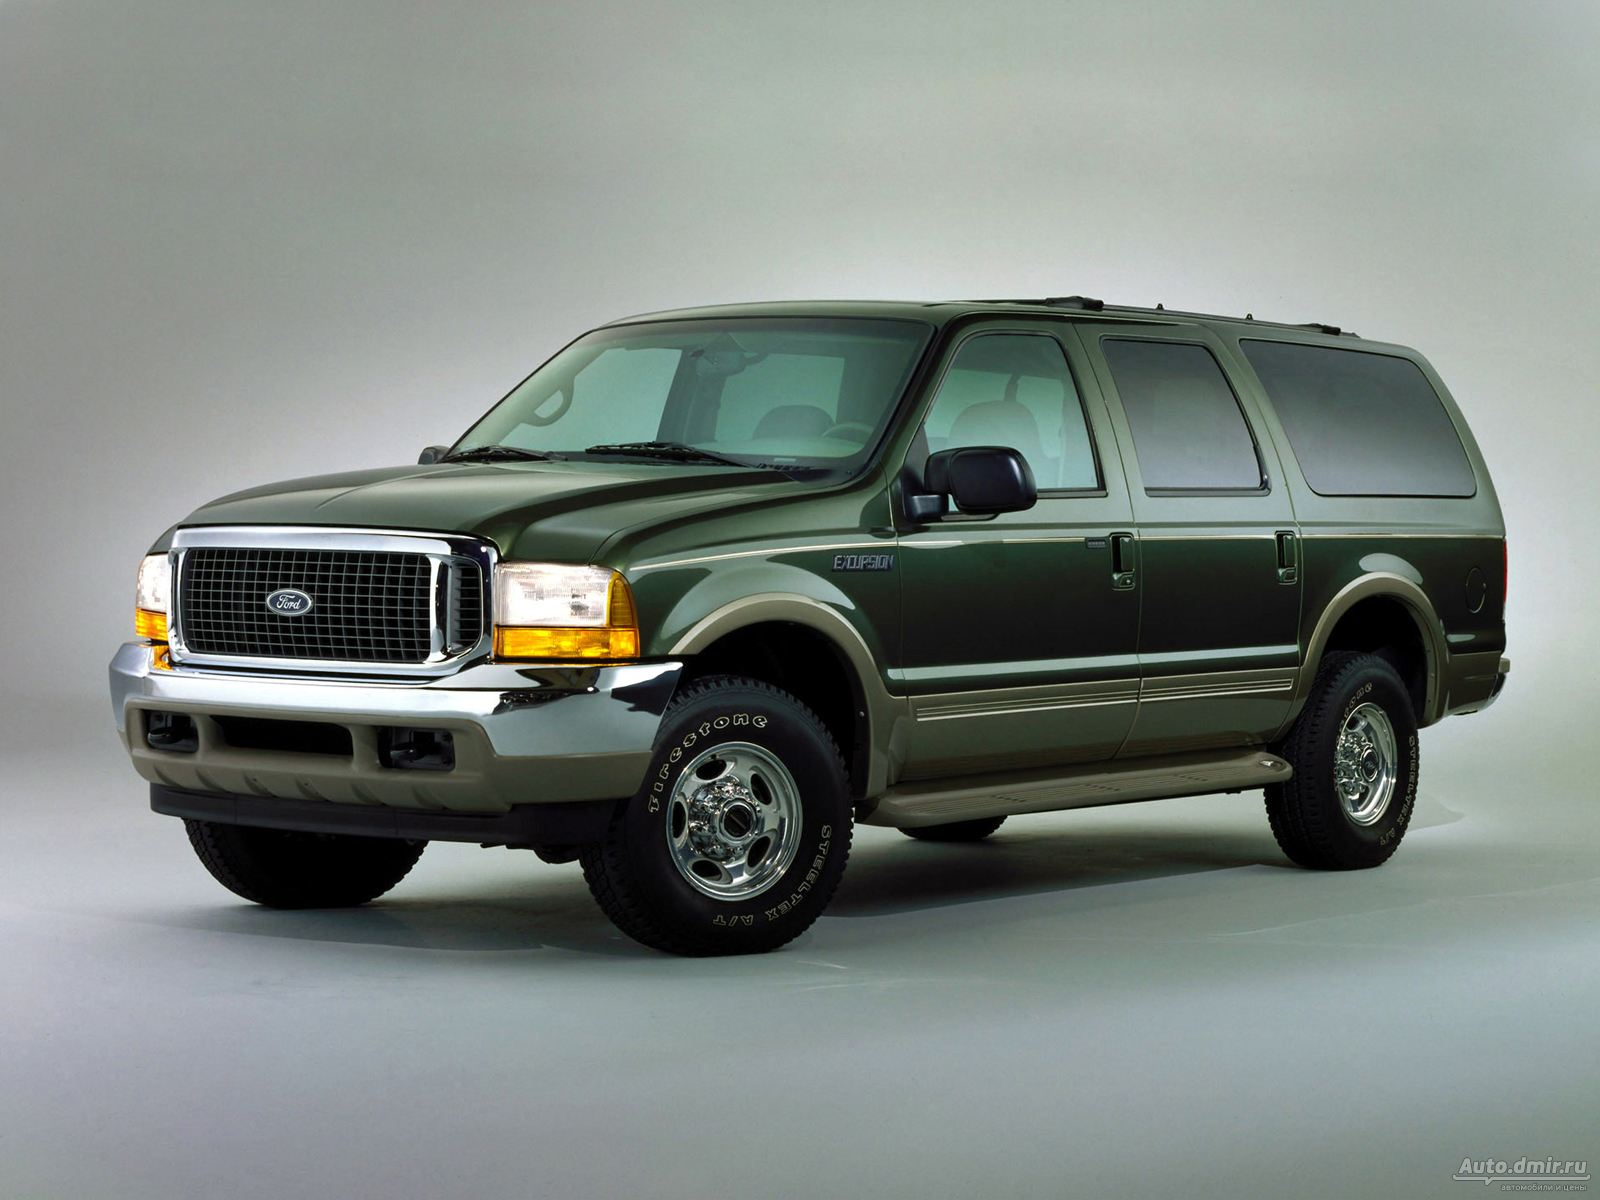 Ford excursion 2001 photo - 6